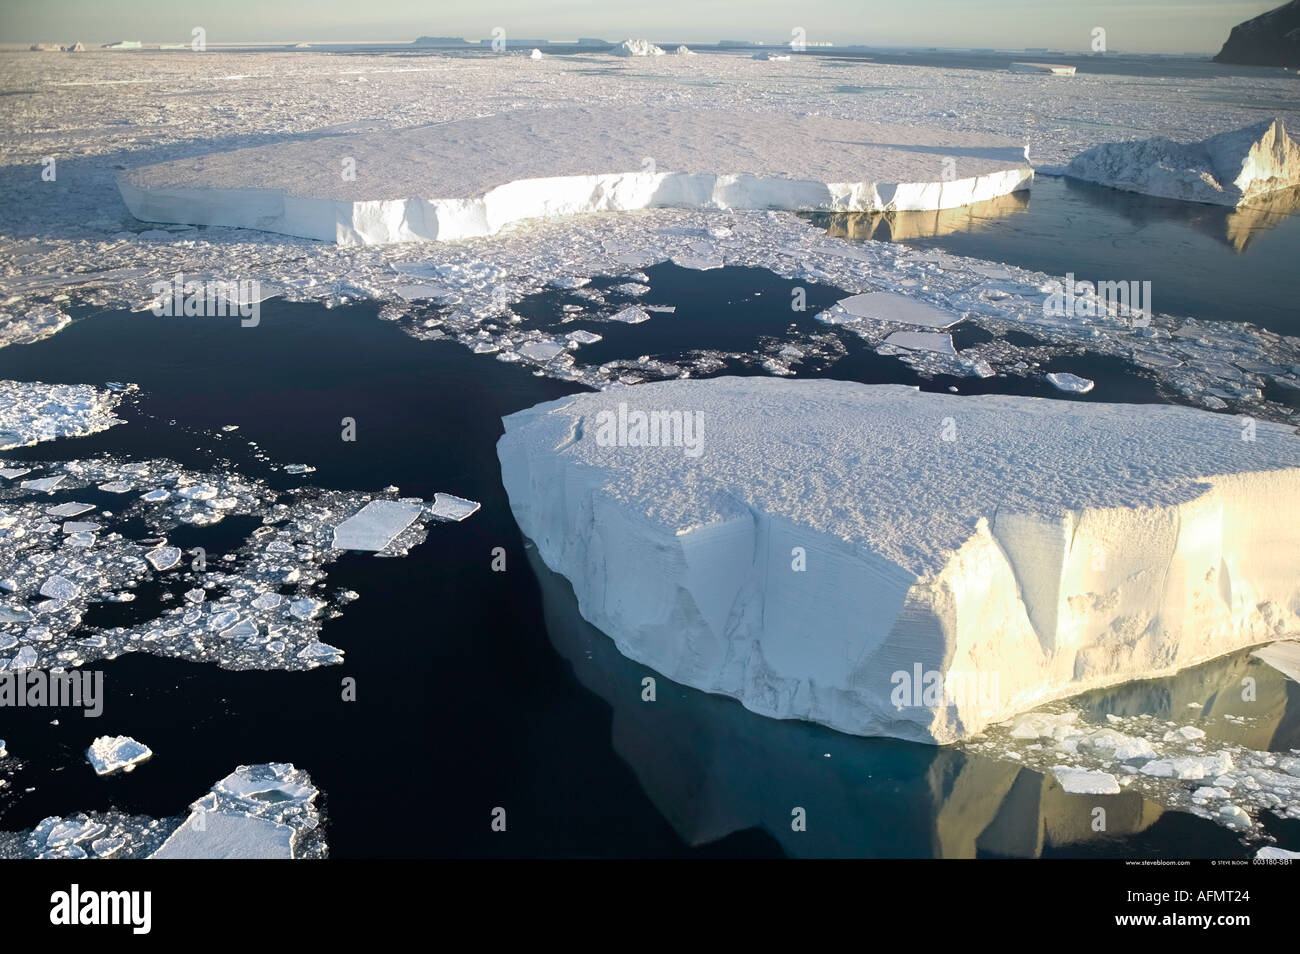 Ice floes a Cape Adare Antartide Foto Stock